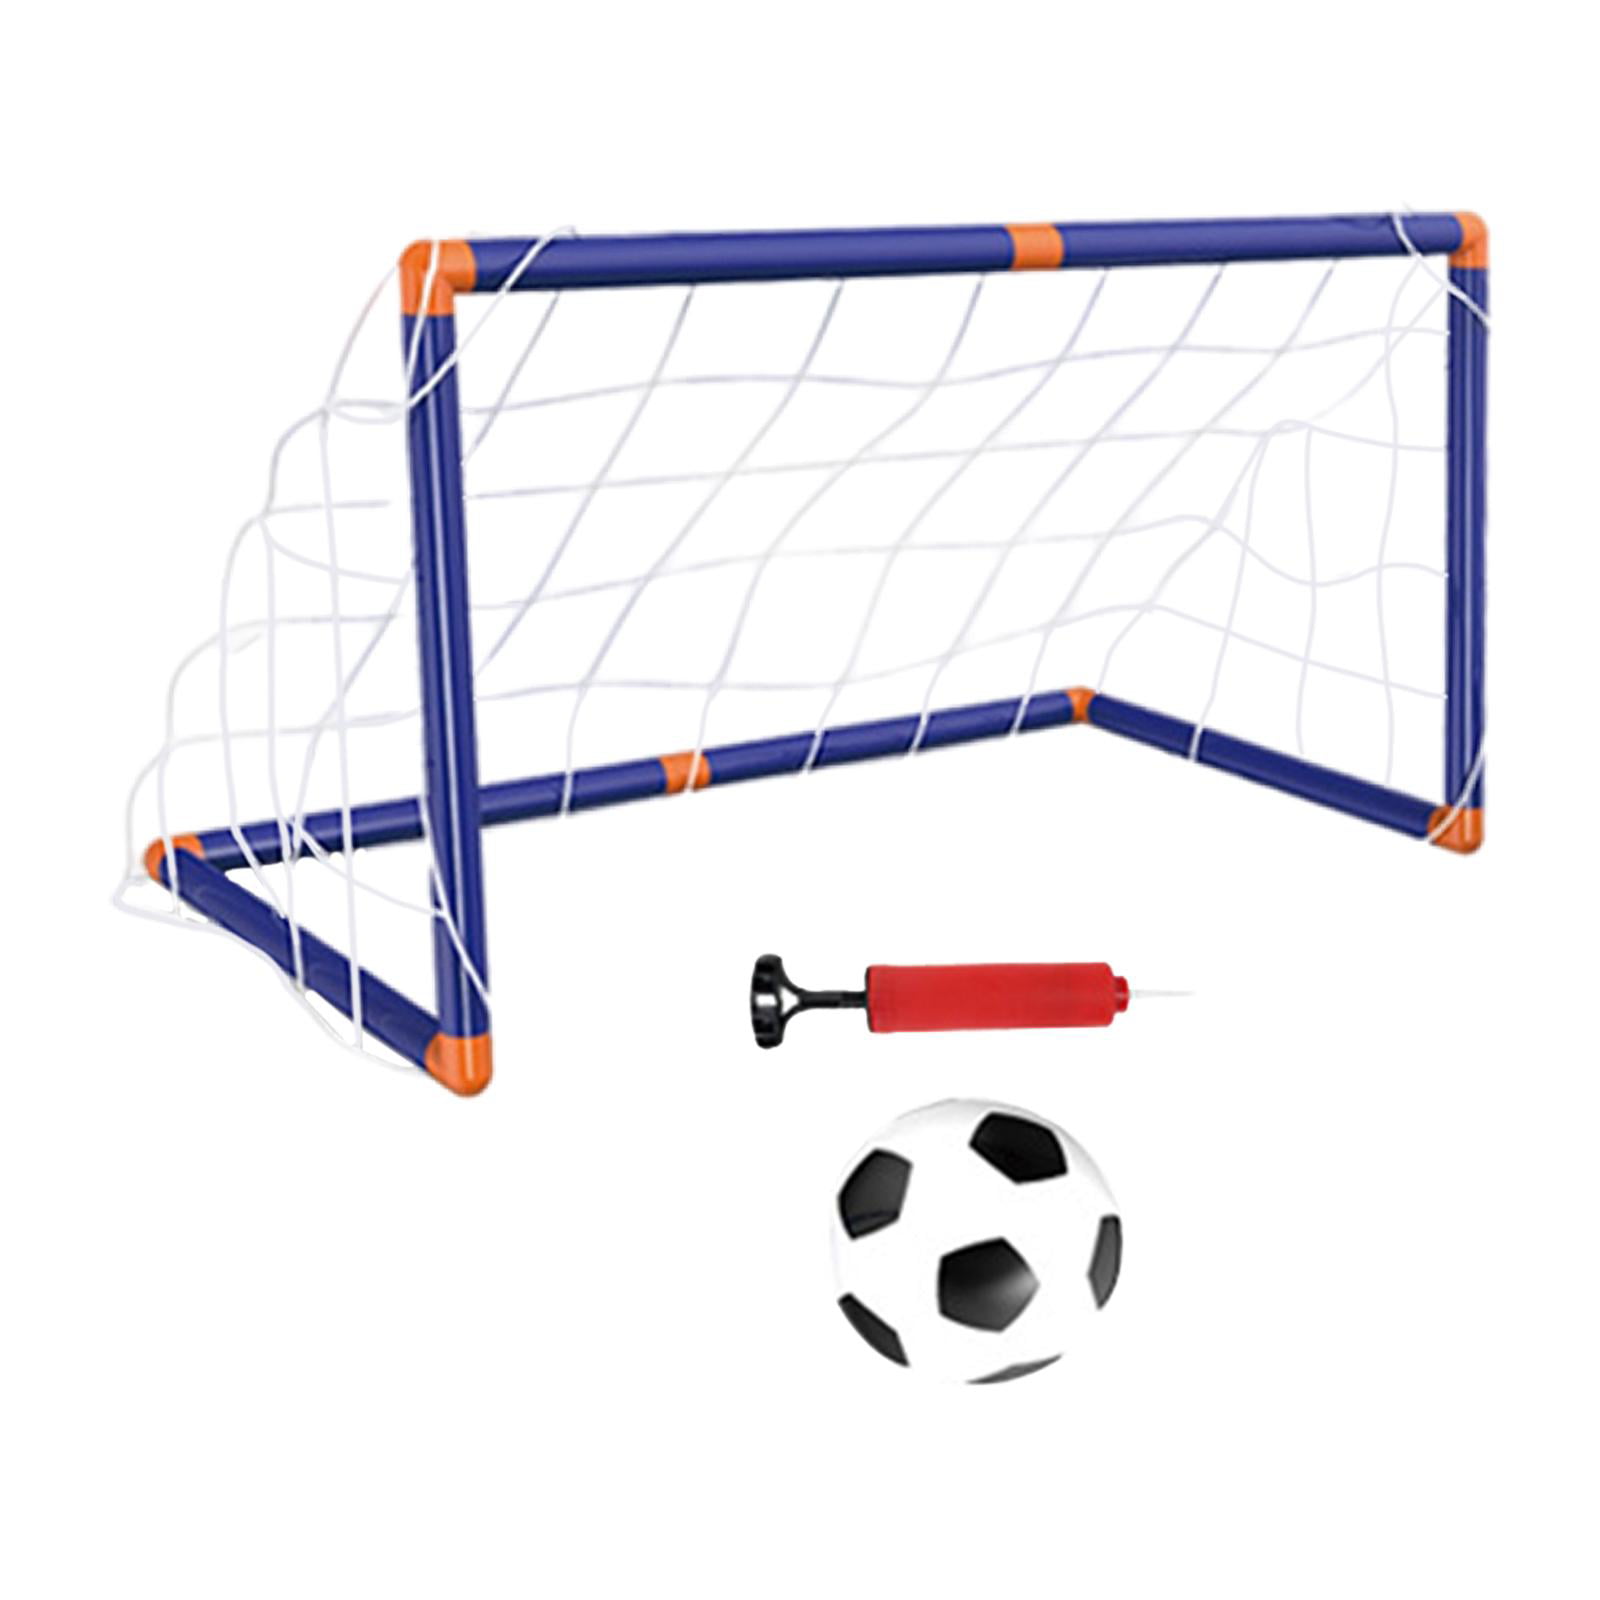 Kids Sports Soccer Toy Set with Ball Pump Goal Net Football Toy Set for DIY Indoor Outdoor Practice,Soccer Goal Net Play Set for Kids 